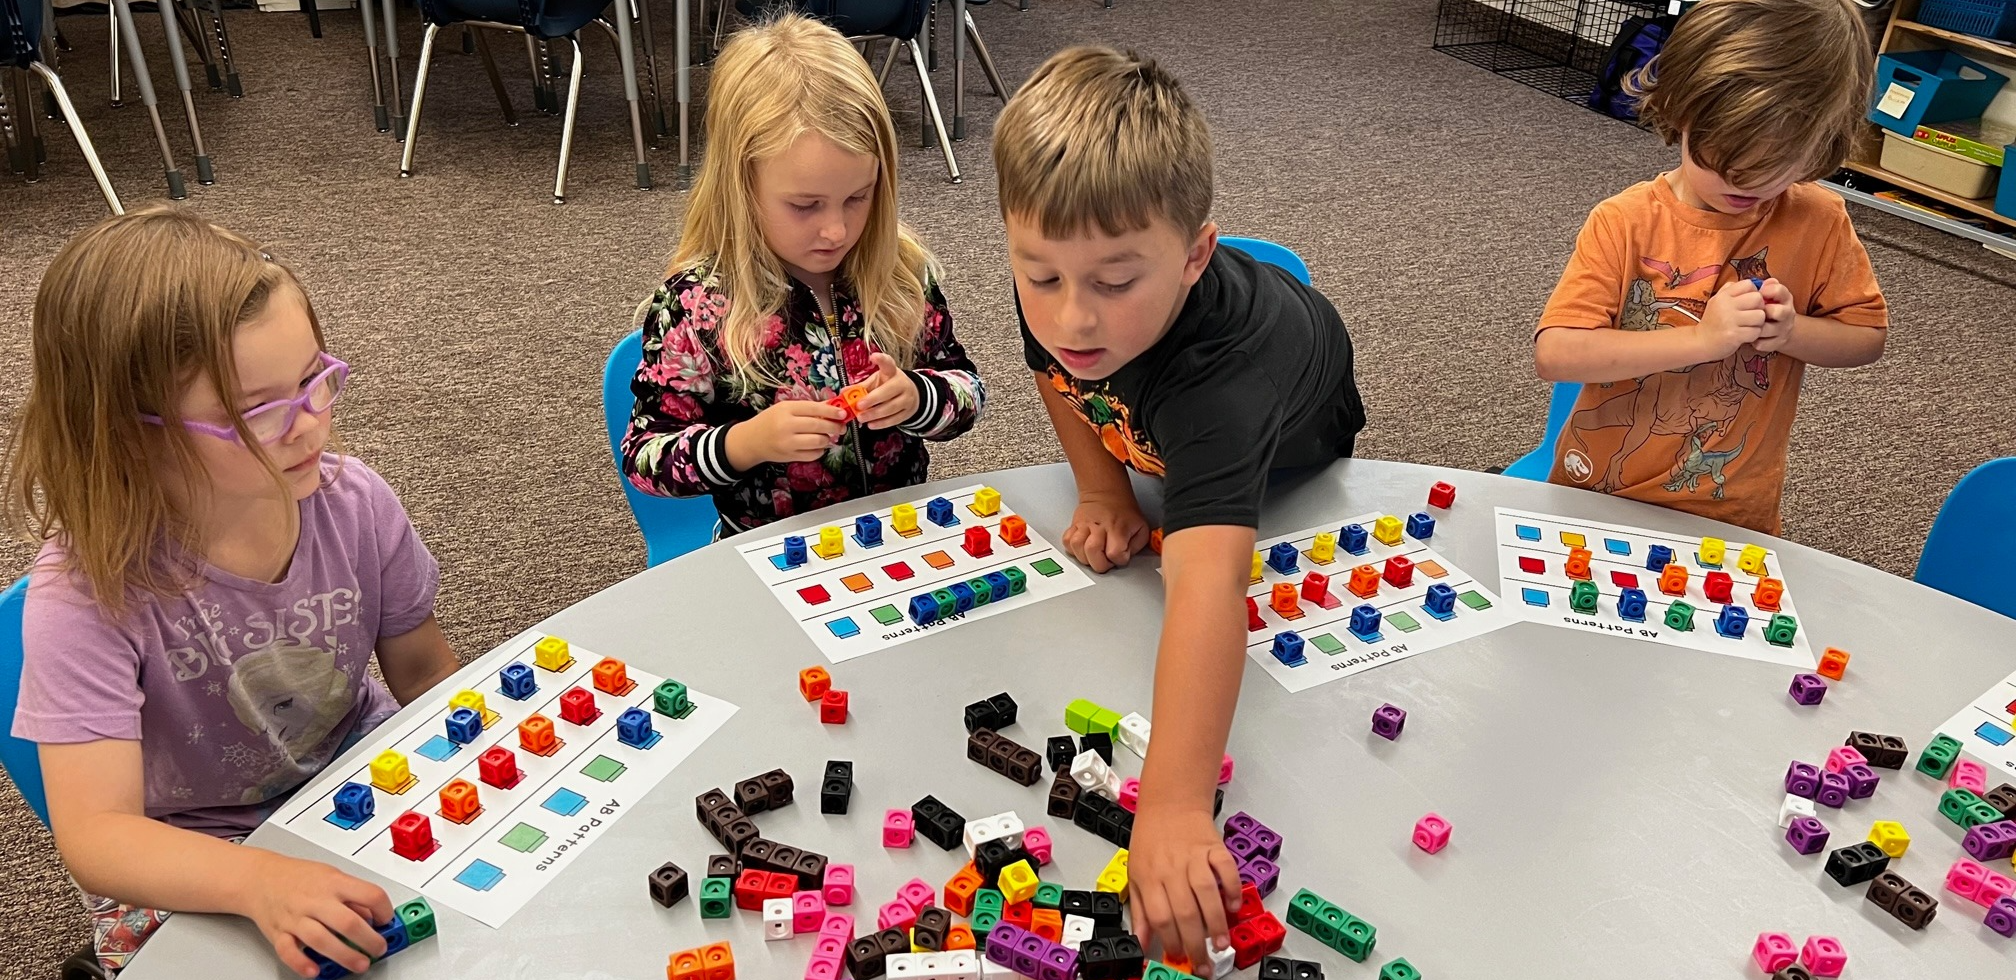 young students play with blocks at a table